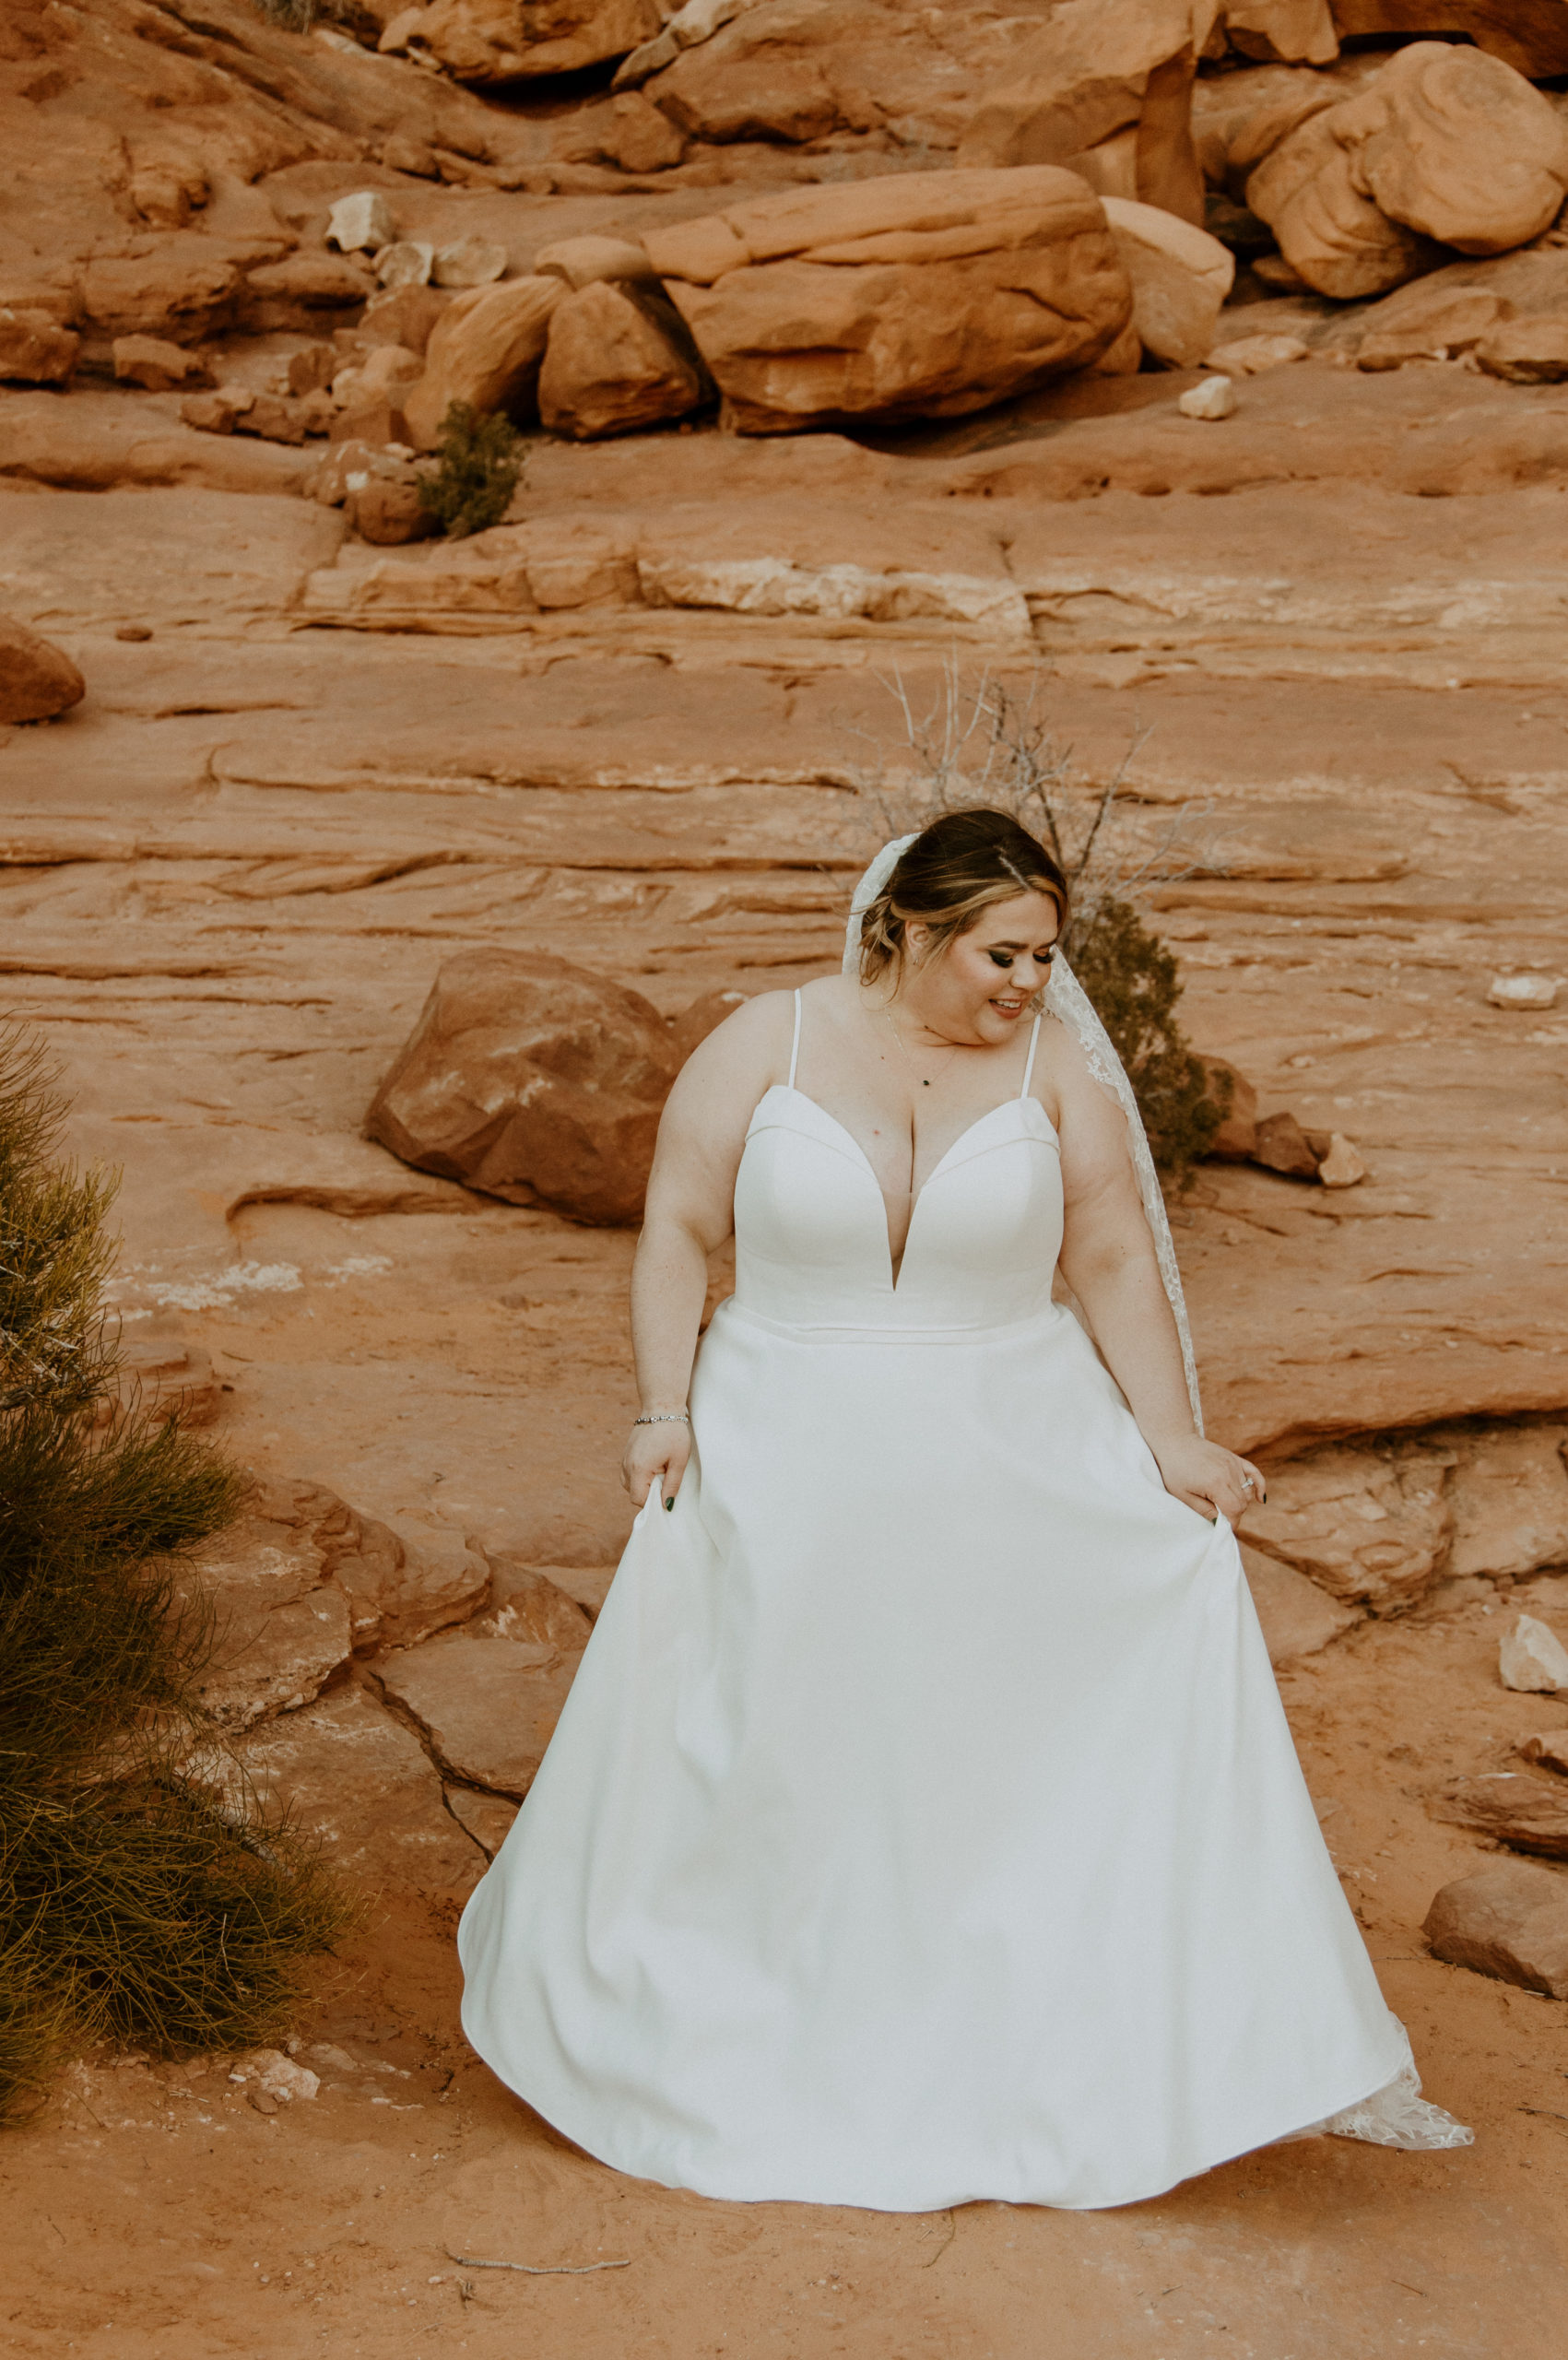 the bride at Arches National Park in Utah